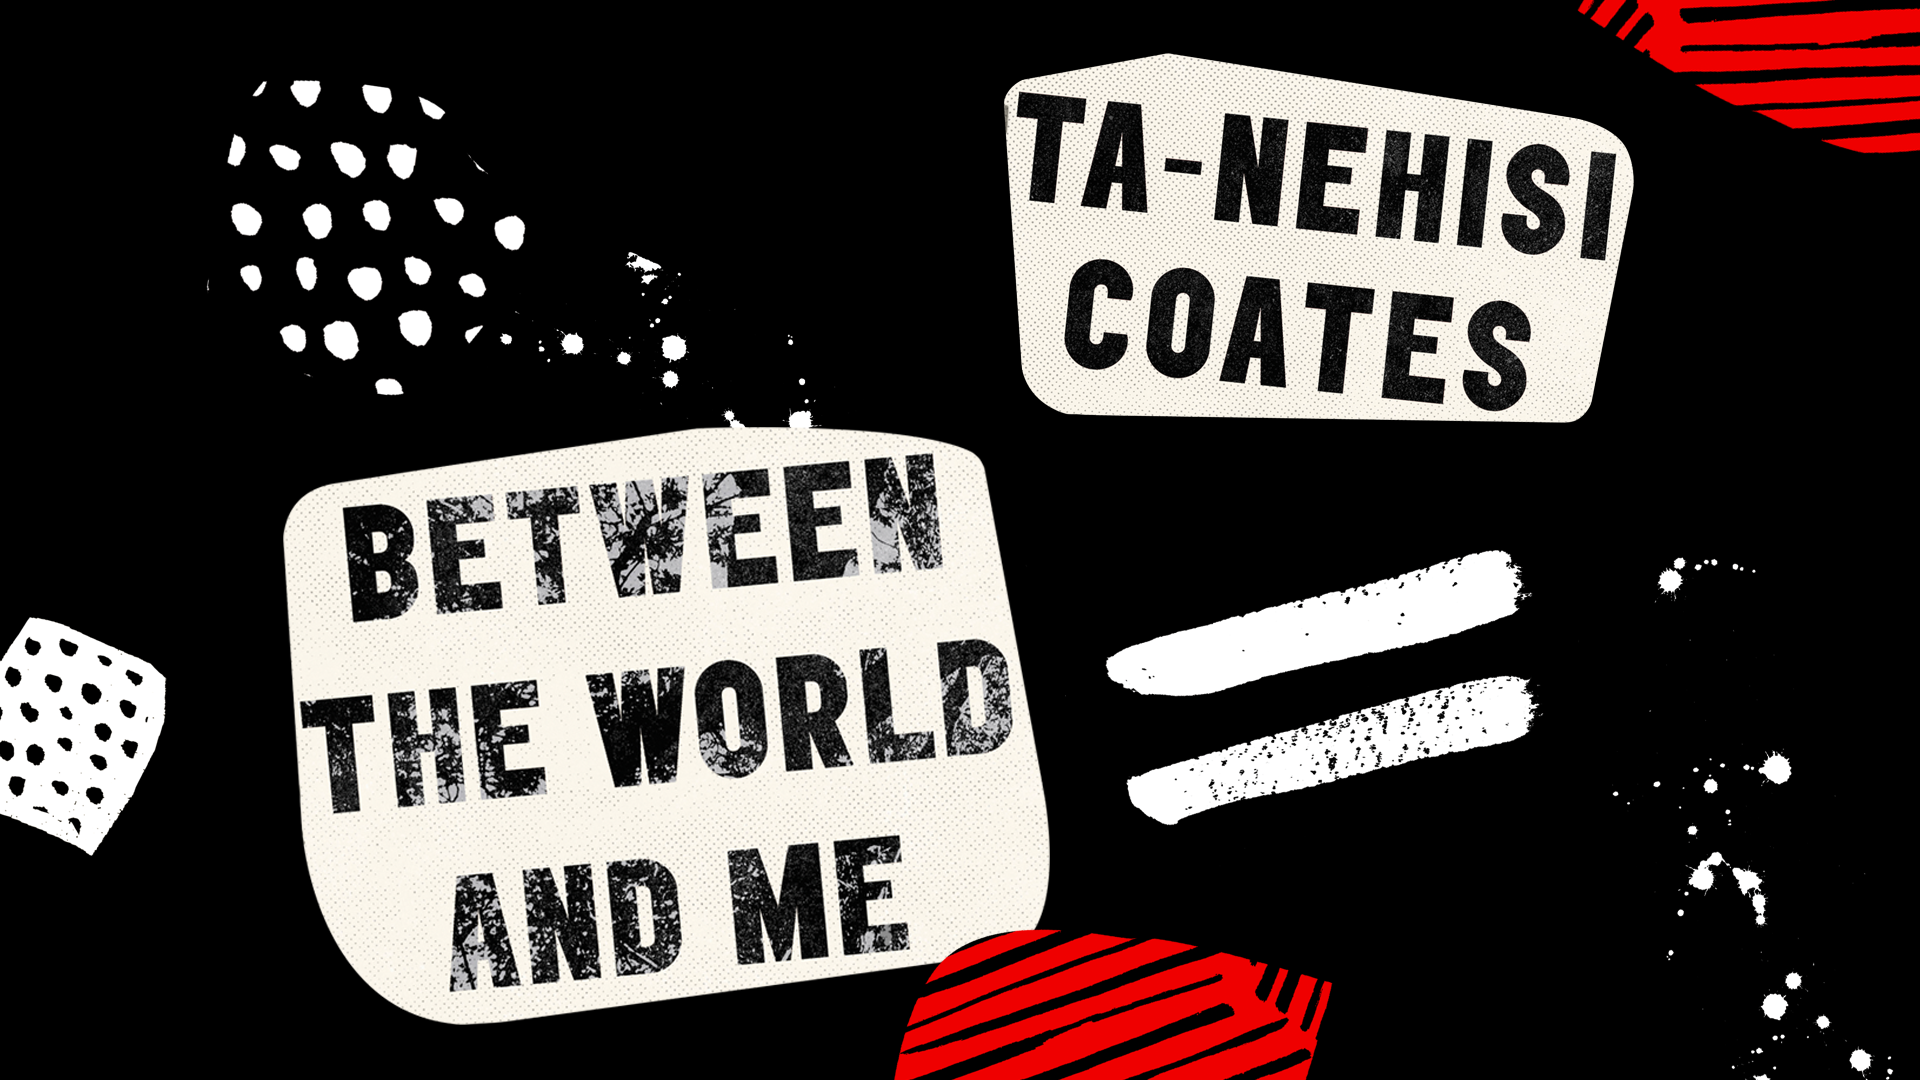 Millennial Book Club presents: A conversation on Between the World and Me by Ta-Nehisi Coates